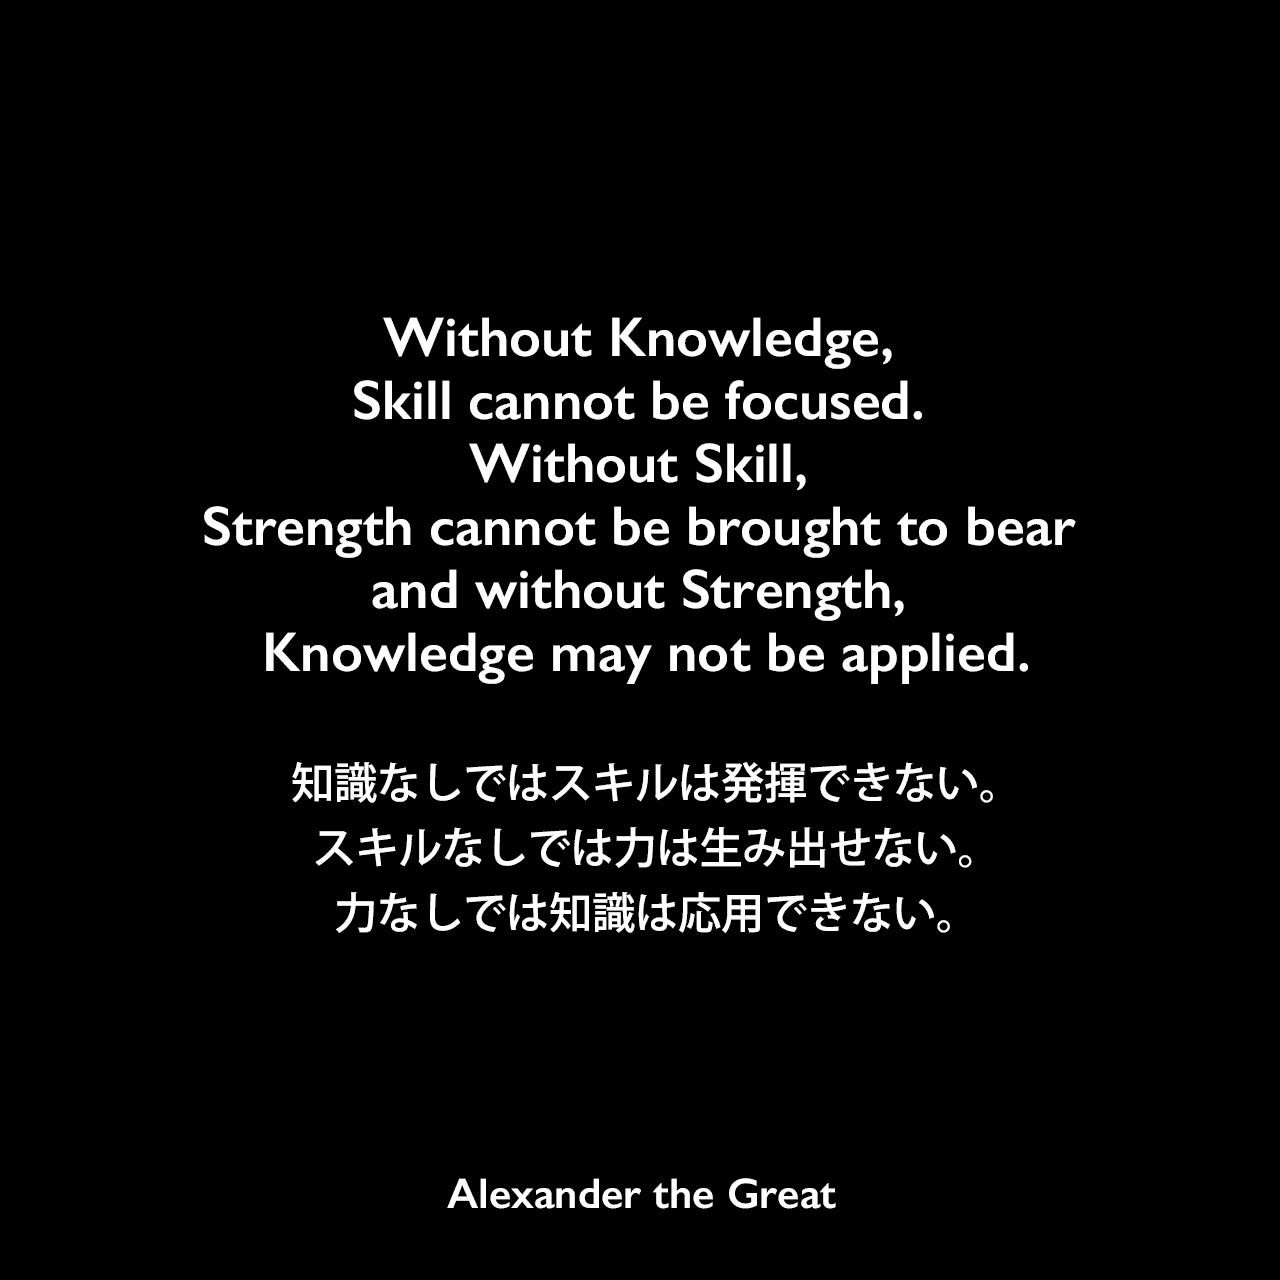 Without Knowledge, Skill cannot be focused. Without Skill, Strength cannot be brought to bear and without Strength, Knowledge may not be applied.知識なしではスキルは発揮できない。スキルなしでは力は生み出せない。力なしでは知識は応用できない。Alexander the Great